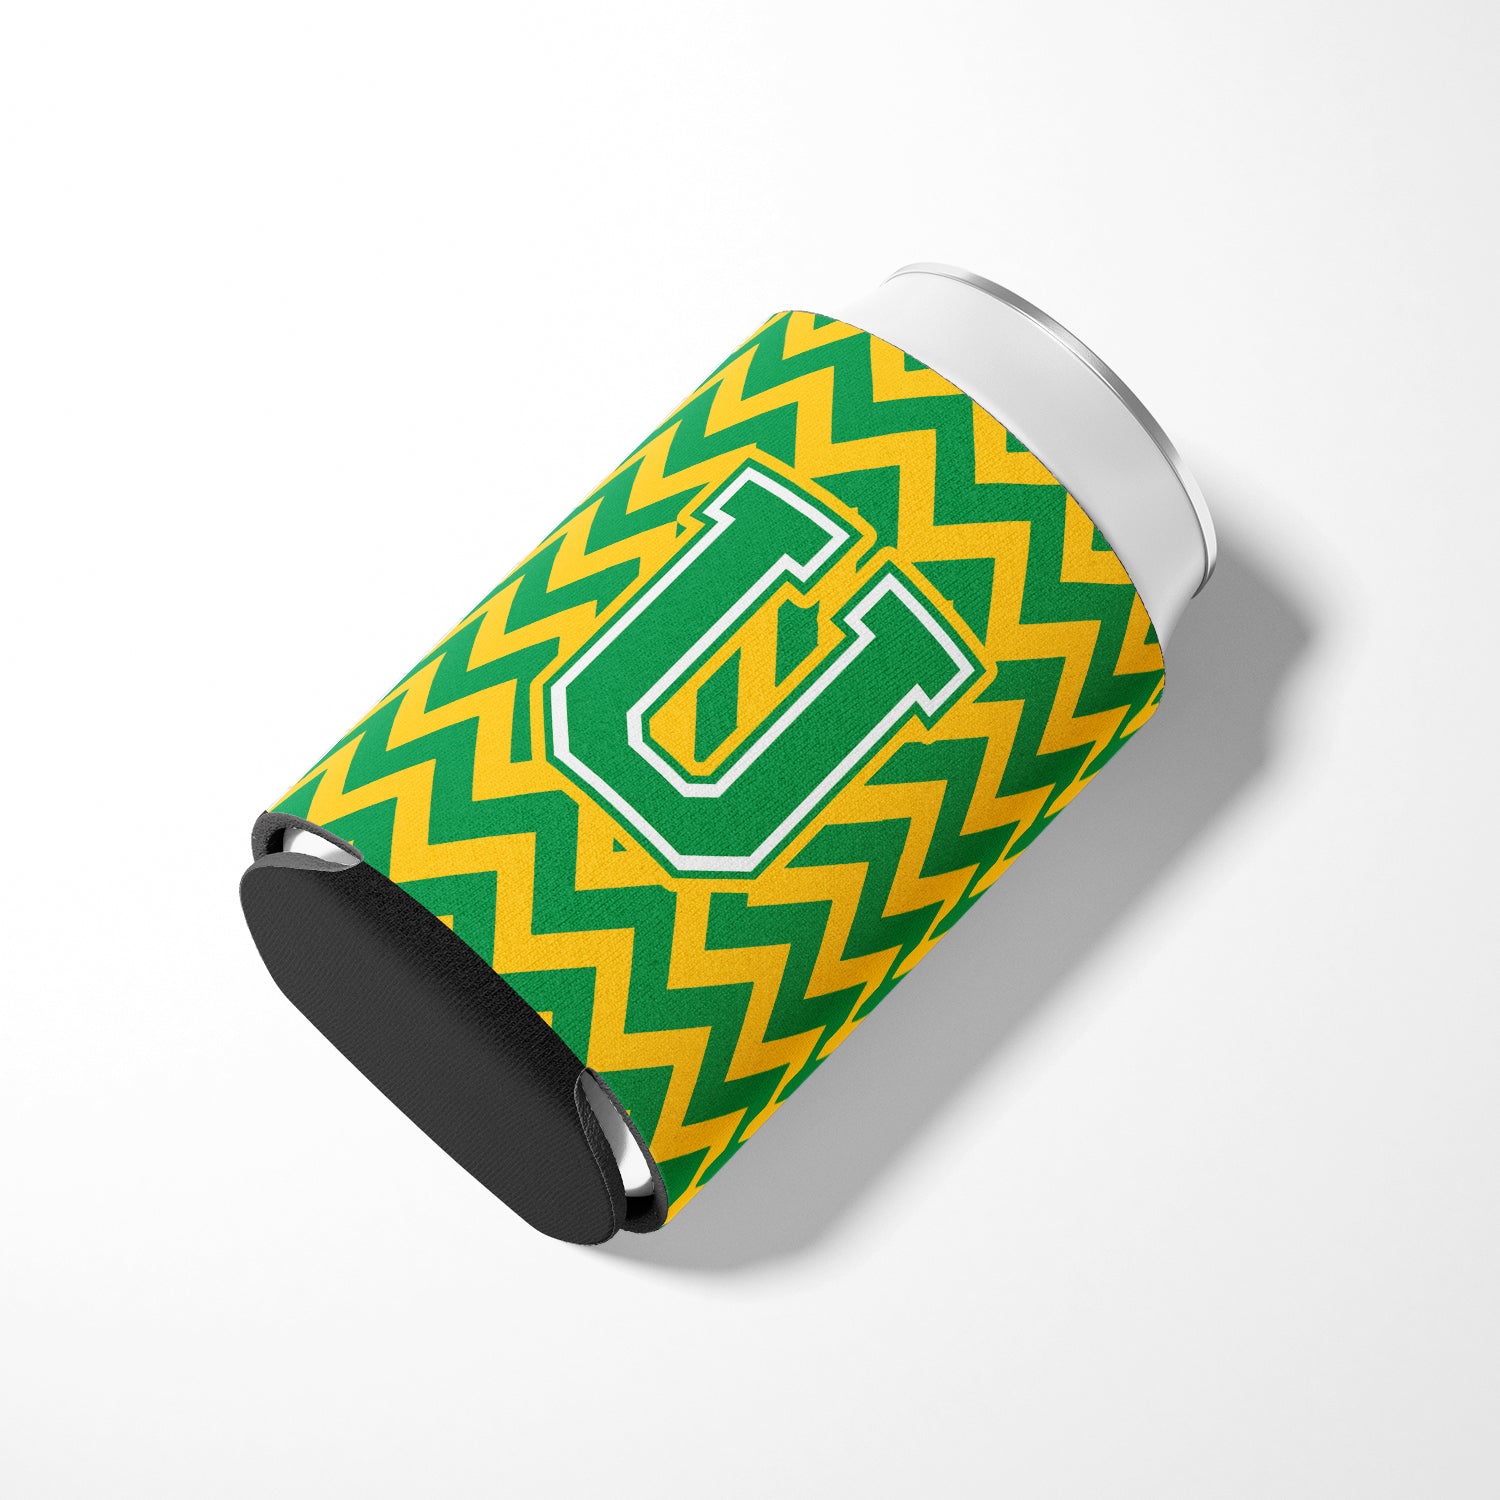 Letter U Chevron Green and Gold Can or Bottle Hugger CJ1059-UCC.